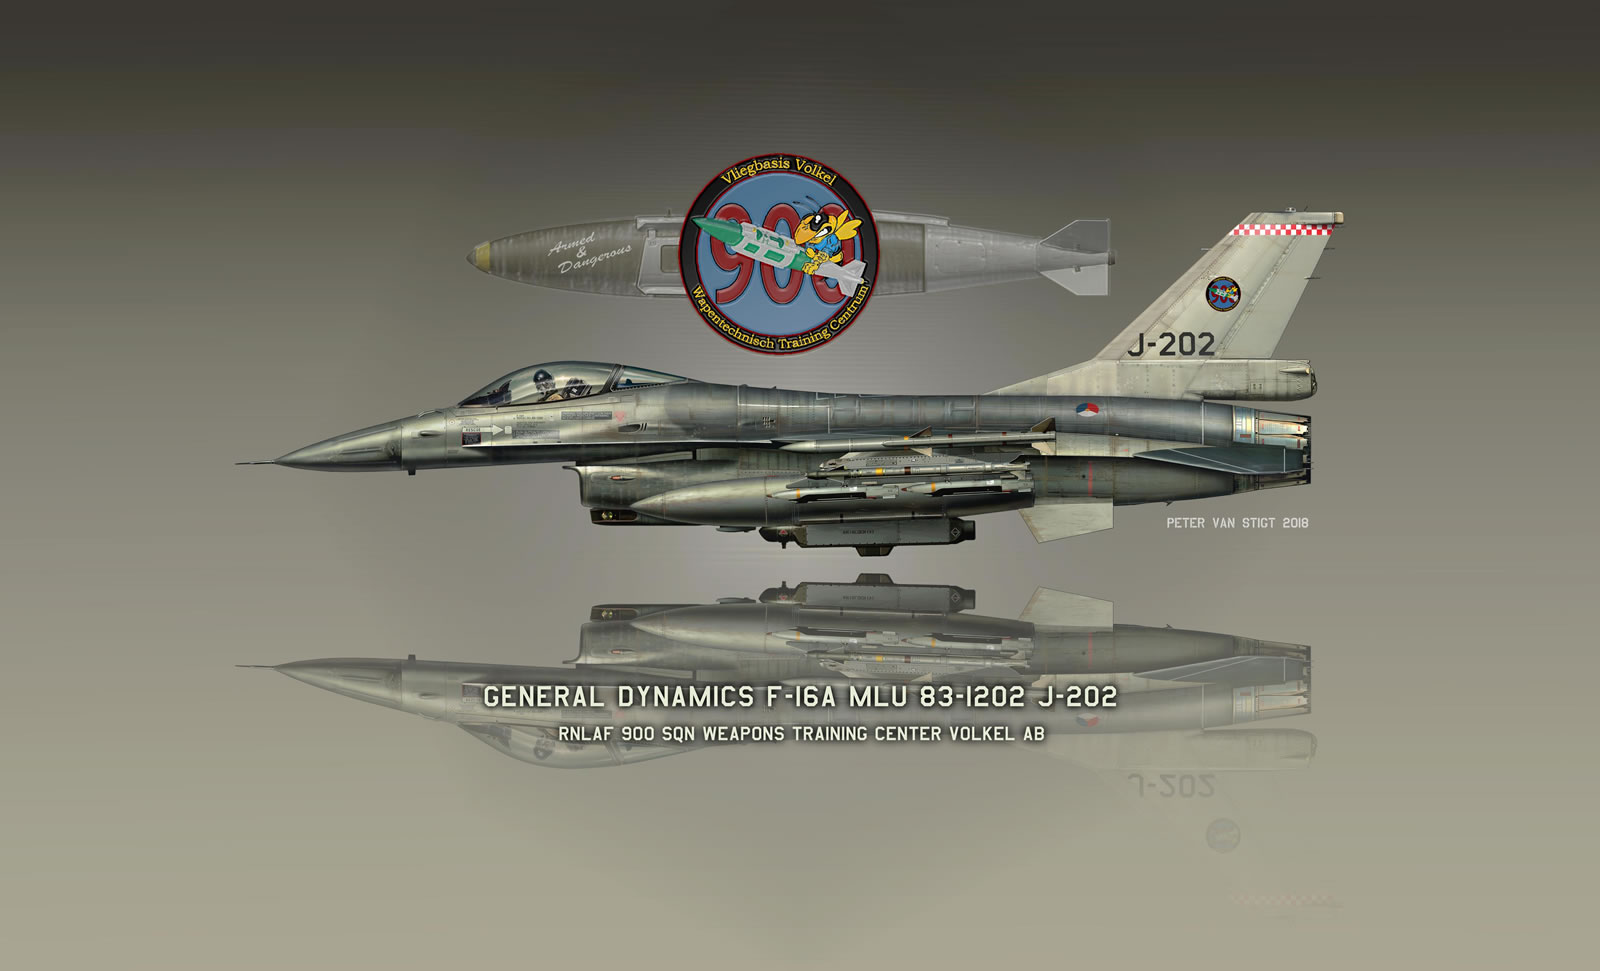 RNLAF Weapons Training Center J-202 F-16 Profile